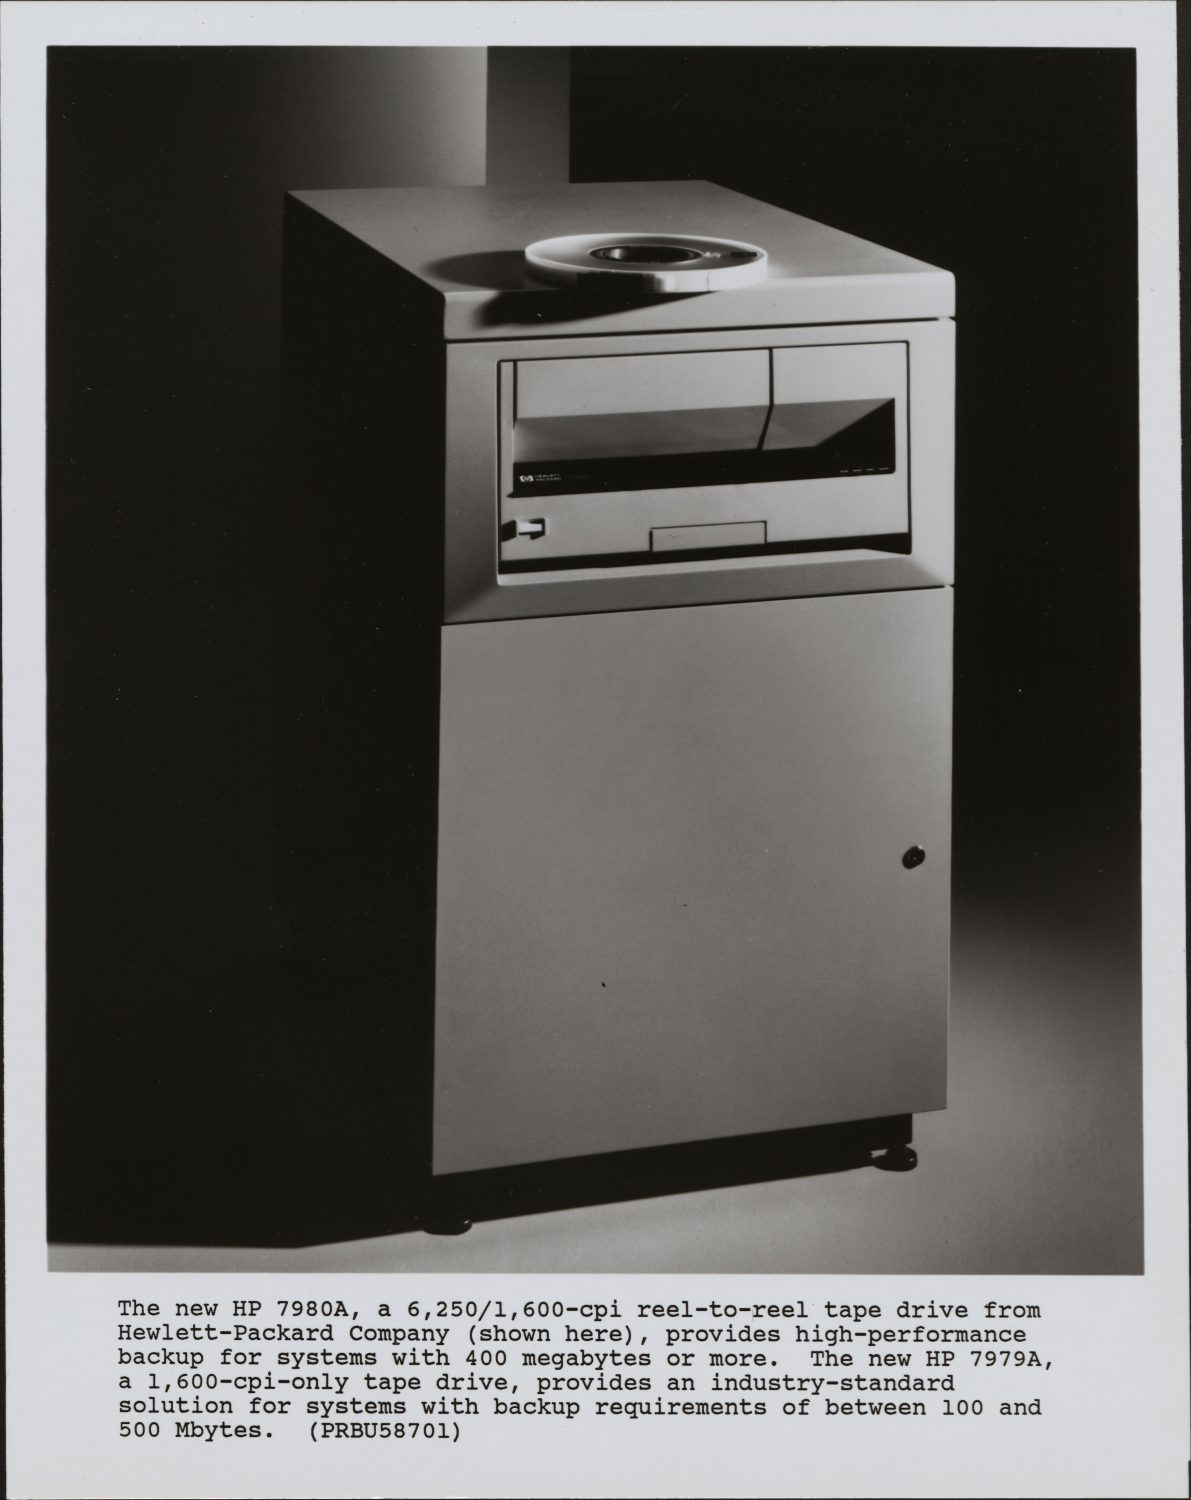 Photo of the HP 7980A data backup system with a typed product description underneath from 1988.